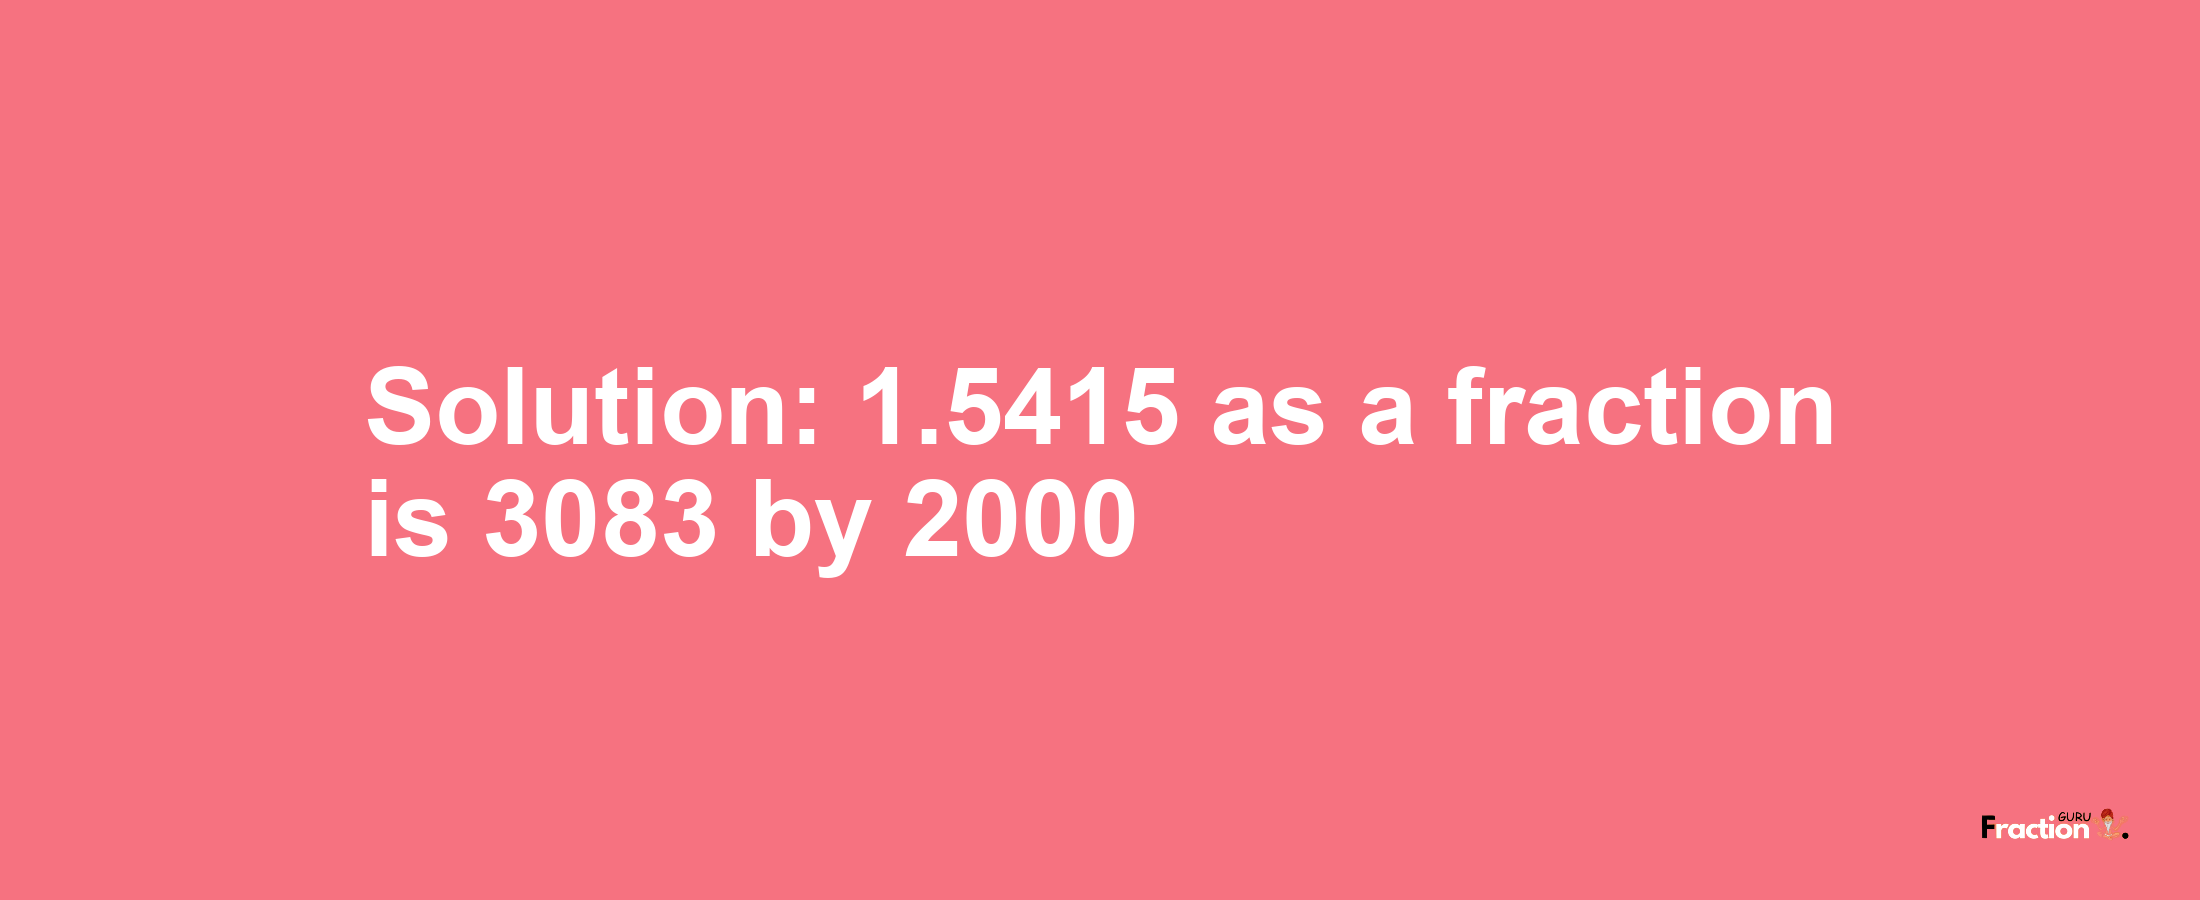 Solution:1.5415 as a fraction is 3083/2000